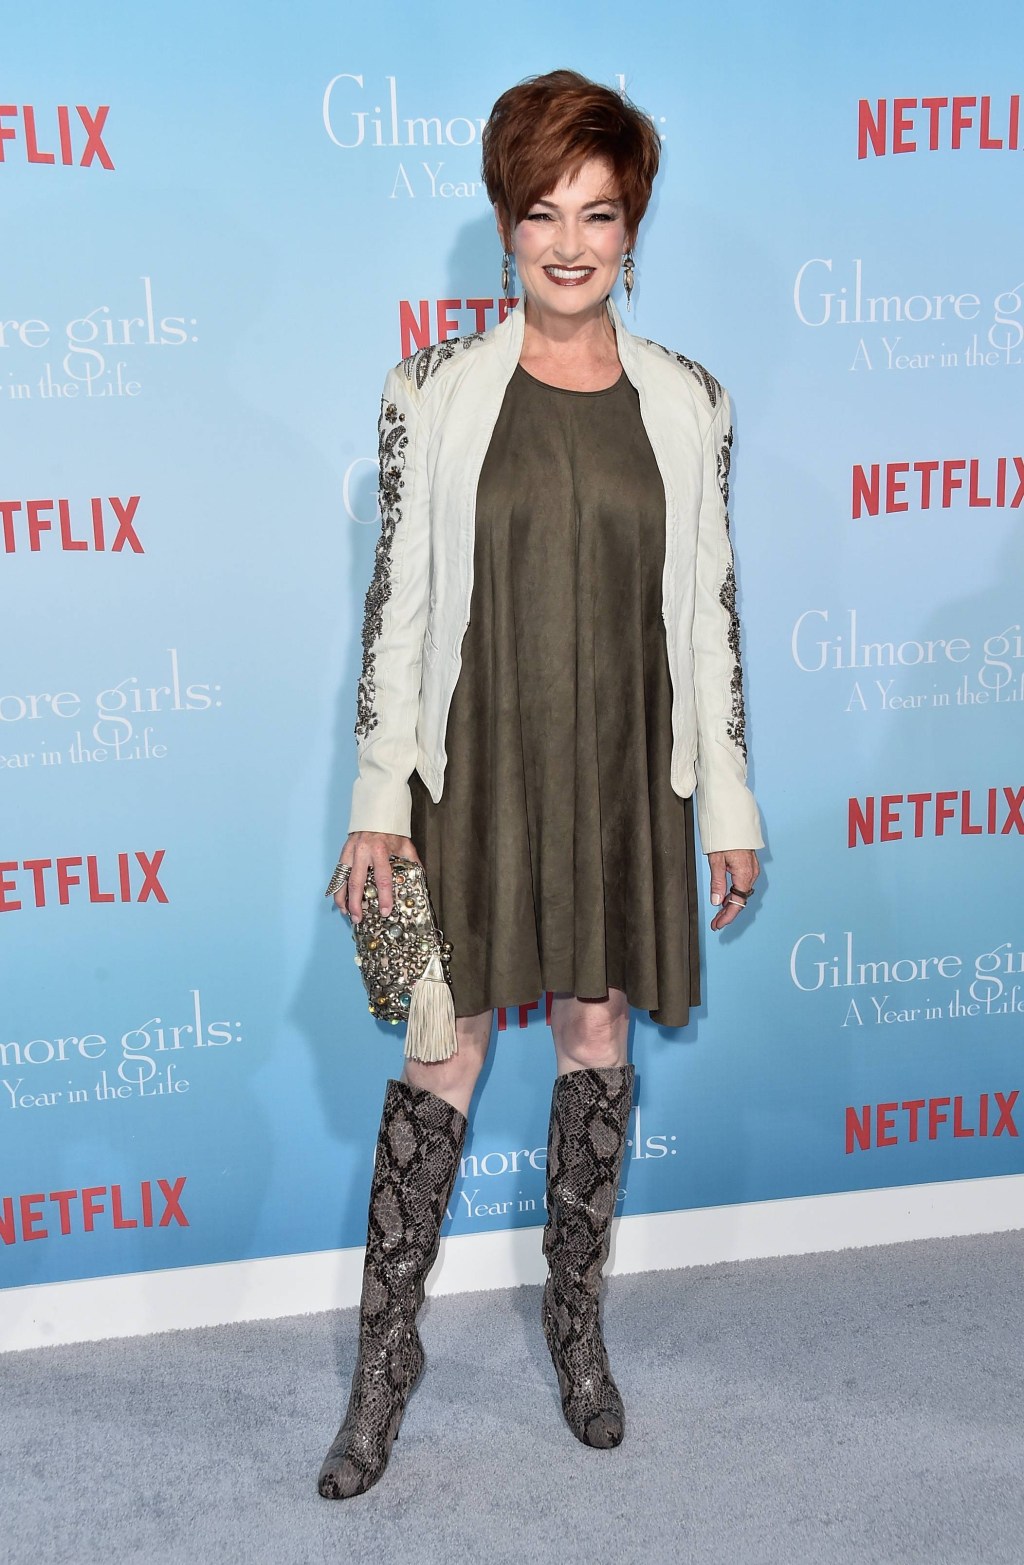 LOS ANGELES, CA - NOVEMBER 18: Actress Carolyn Hennesy attends the premiere of Netflix's "Gilmore Girls: A Year In The Life" at the Regency Bruin Theatre on November 18, 2016 in Los Angeles, California. (Photo by Alberto E. Rodriguez/Getty Images)